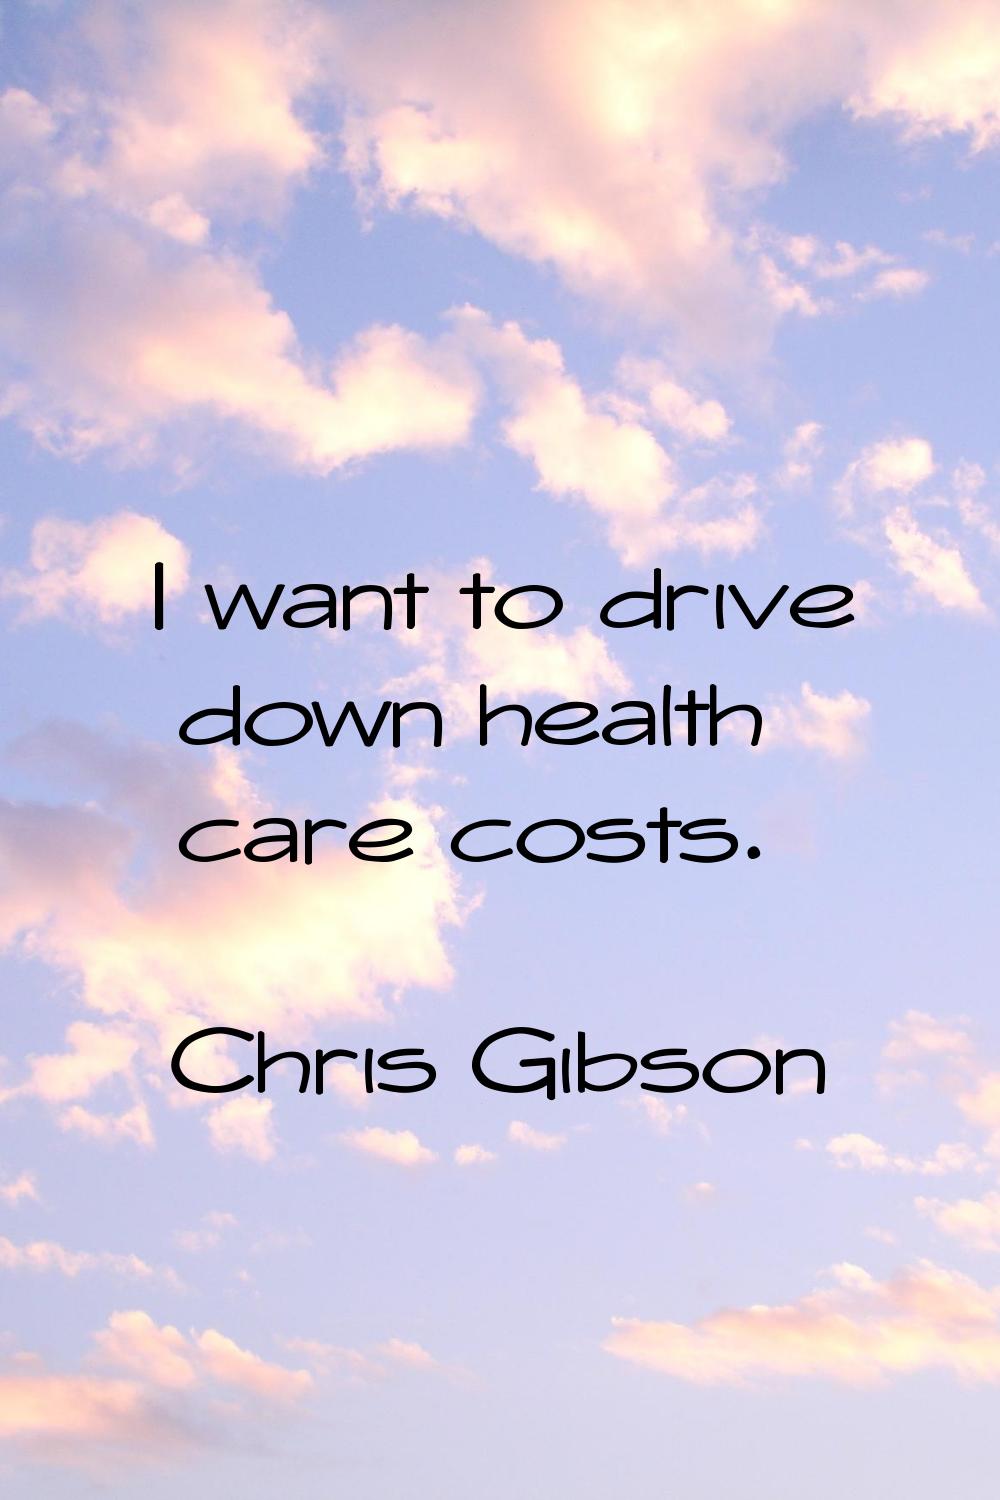 I want to drive down health care costs.